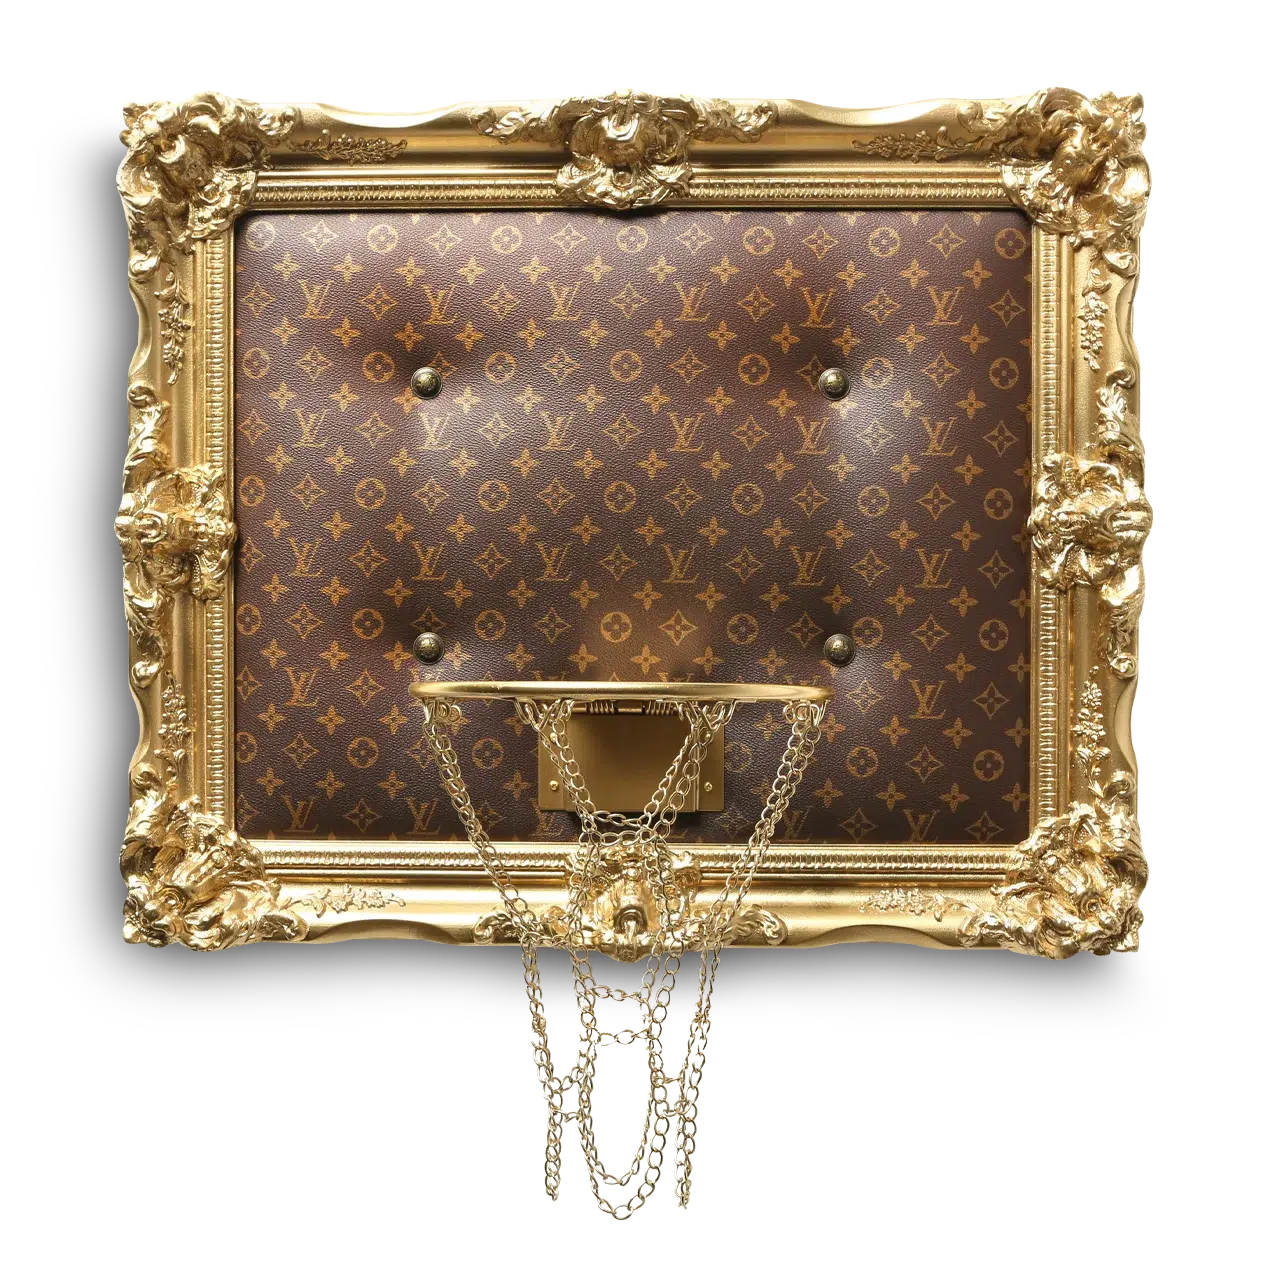 Luxury basketball hoop made by Louis Vuitton.